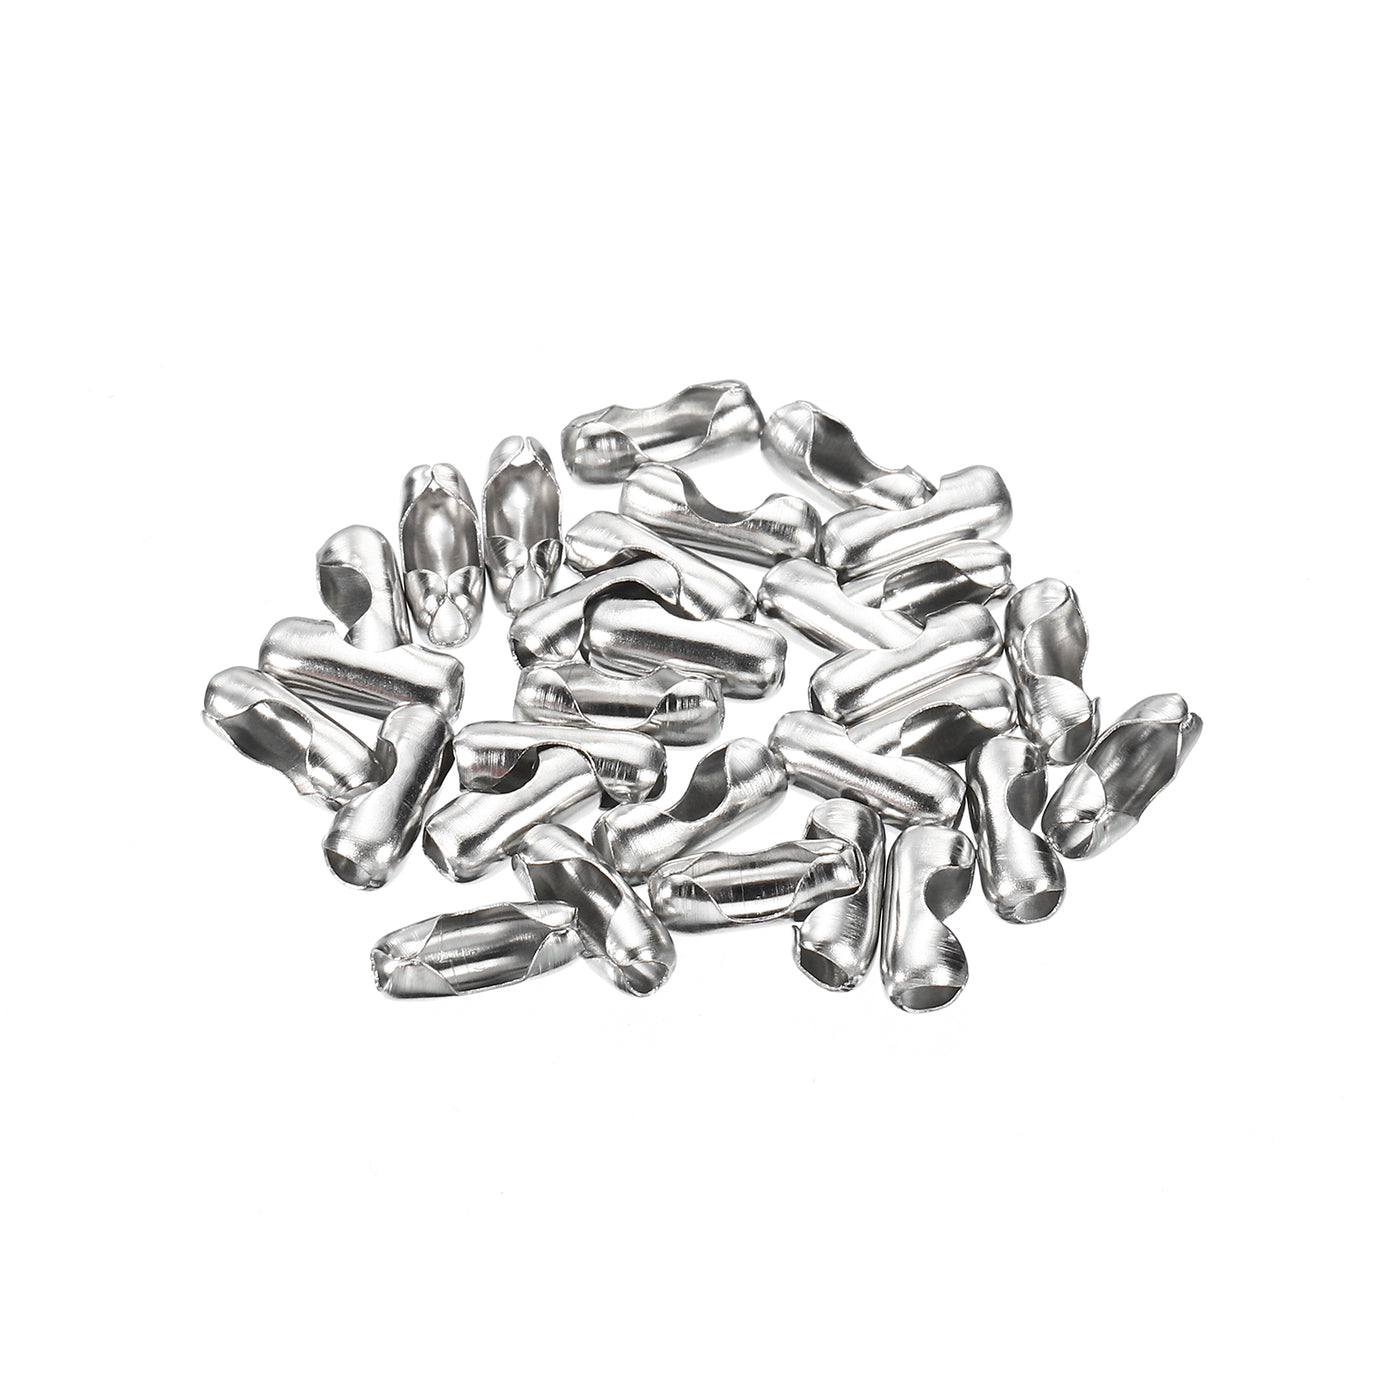 Harfington Ball Chain Connector Clasps, Stainless Steel Replacement Cord Connector Fit for 2.4/3.2/4.5/6/8/10mm Beaded Ball Chain, Silver Pack of 108